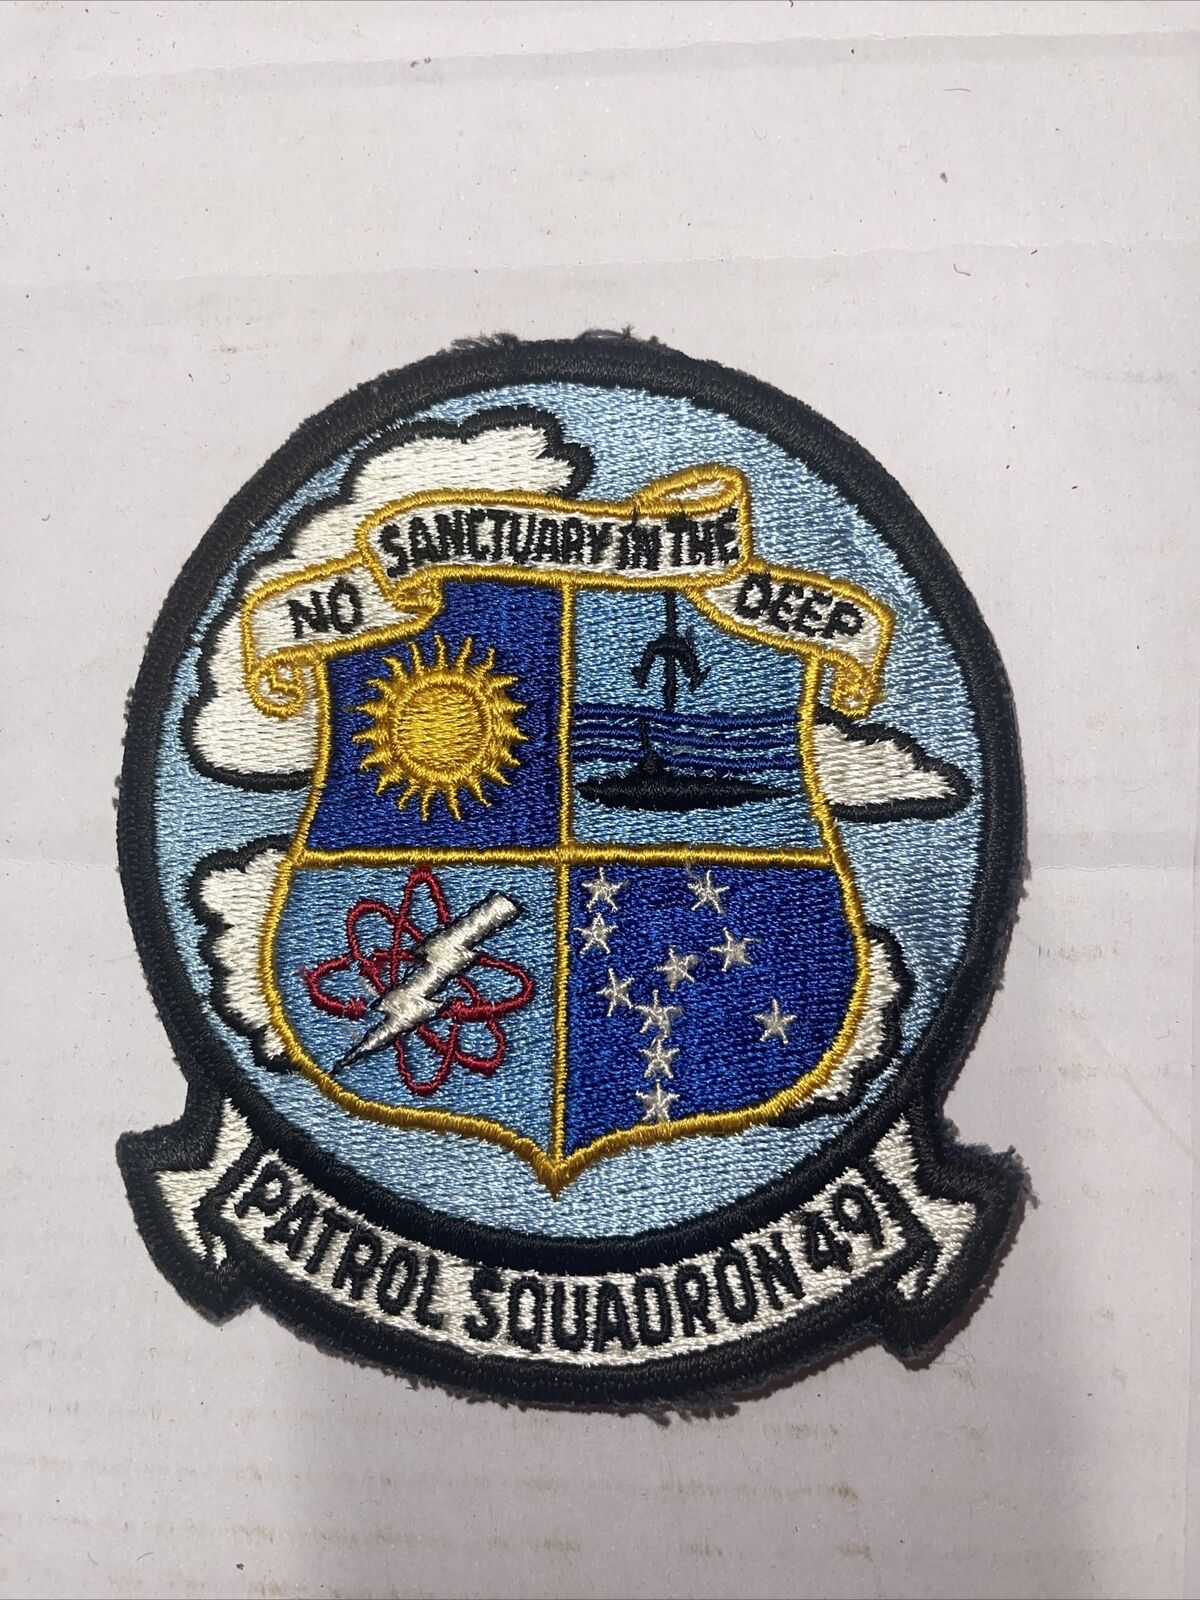 Vinrage US Navy VP-49 Patrol Squadron No Sanctuary In The Deep Patch WW2